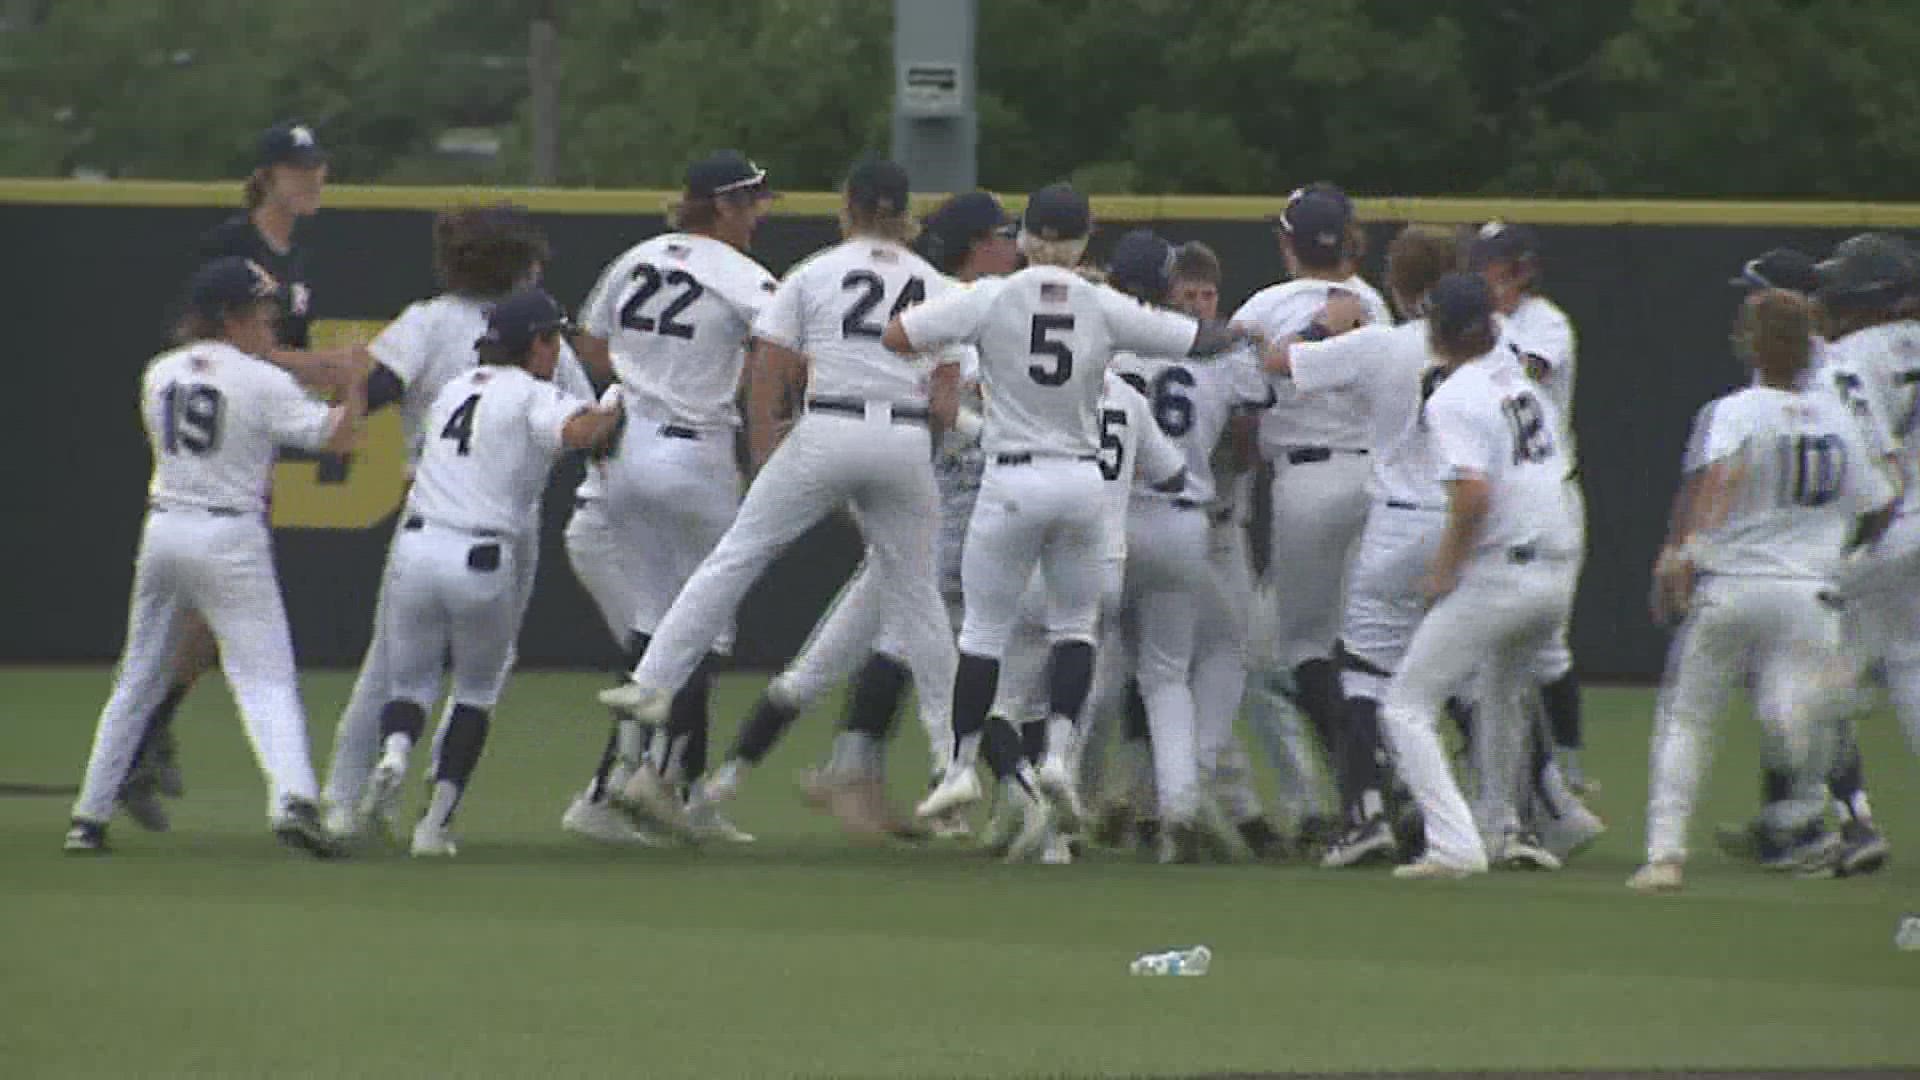 Pleasant Valley gets a walk off single to advance to the State Championship game.